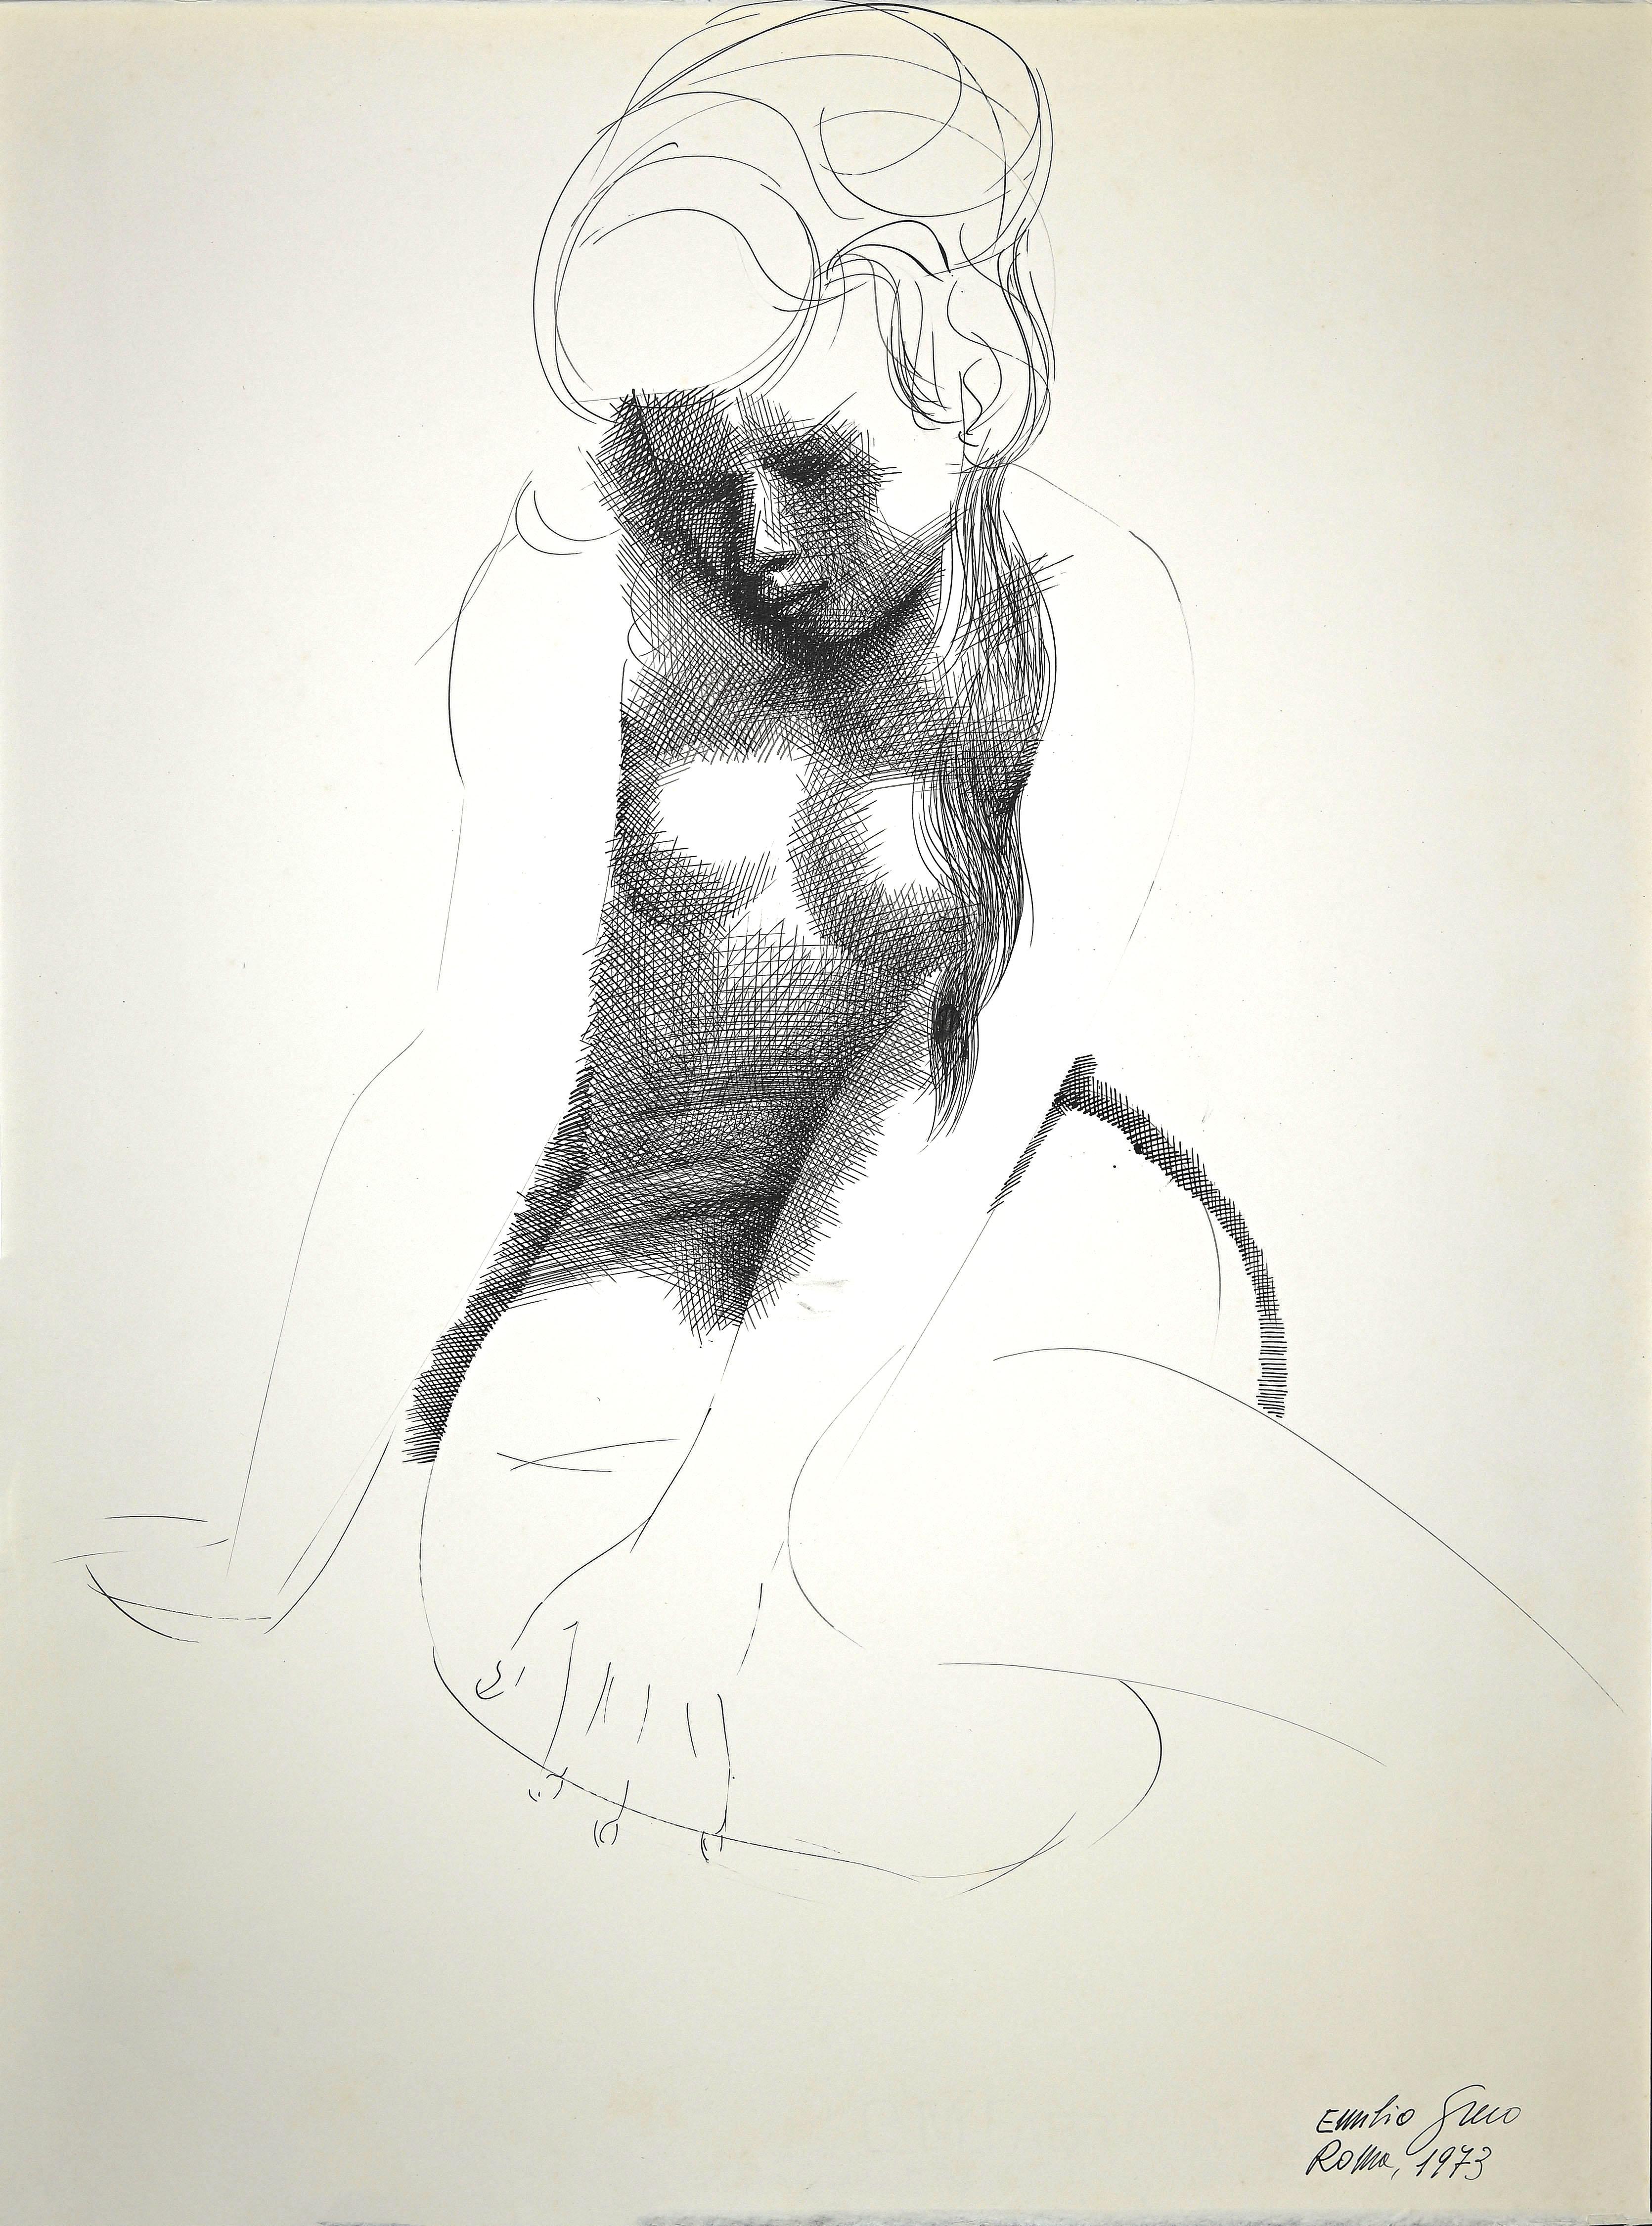 Nude of Woman - China Ink Drawing by E. Greco - 1973 - Art by Emilio Greco